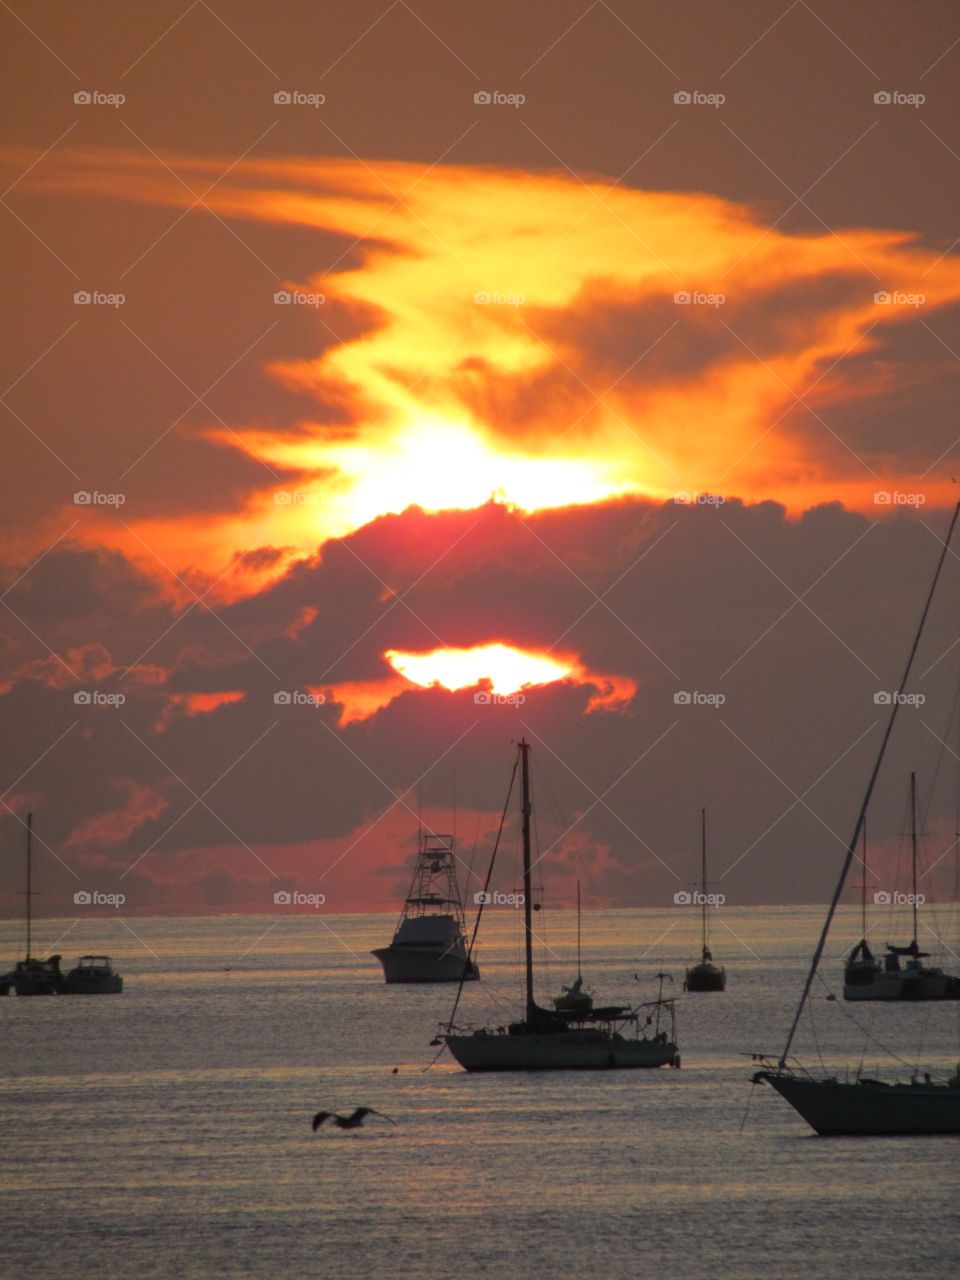 Fire in the sky, Sunset over the water, sailboats in fore ground. 